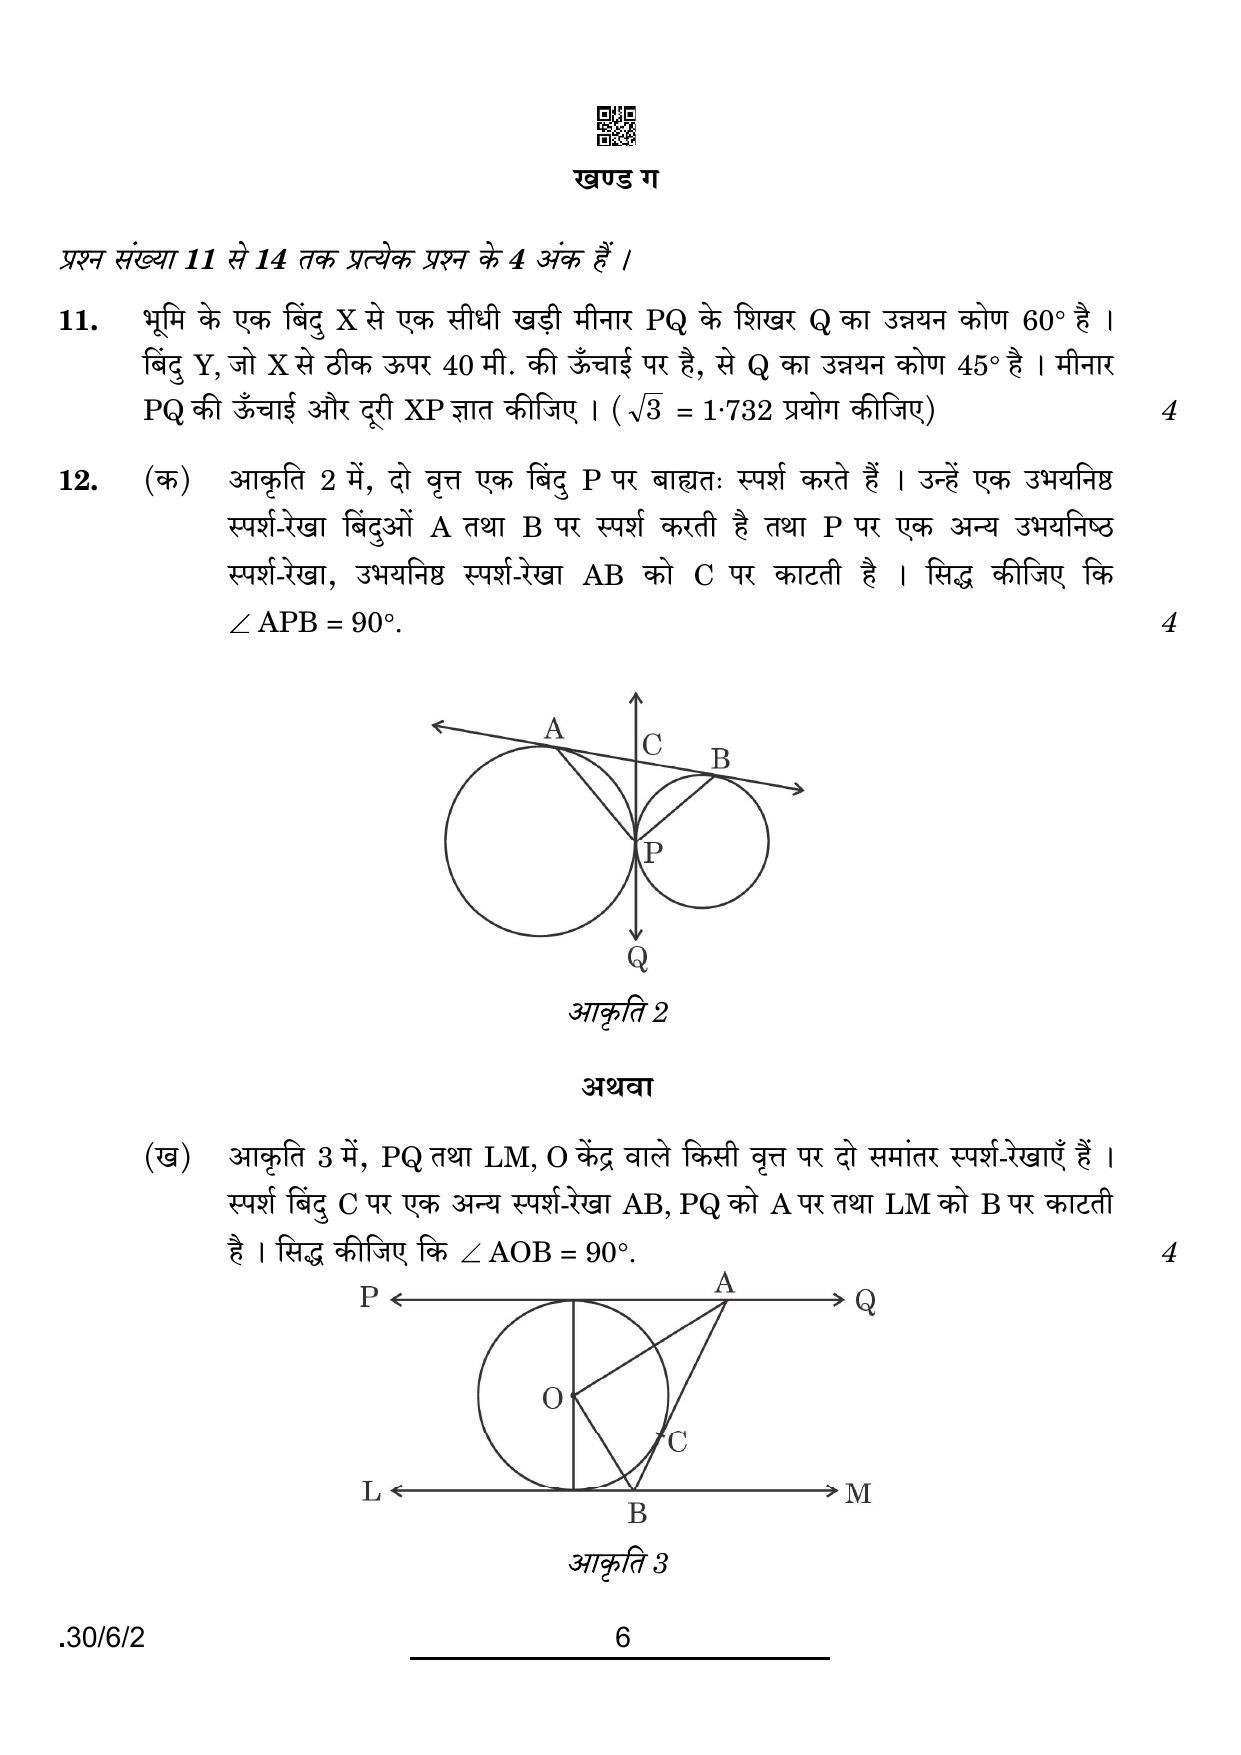 CBSE Class 10 30-6-2 Maths Std. 2022 Compartment Question Paper - Page 6